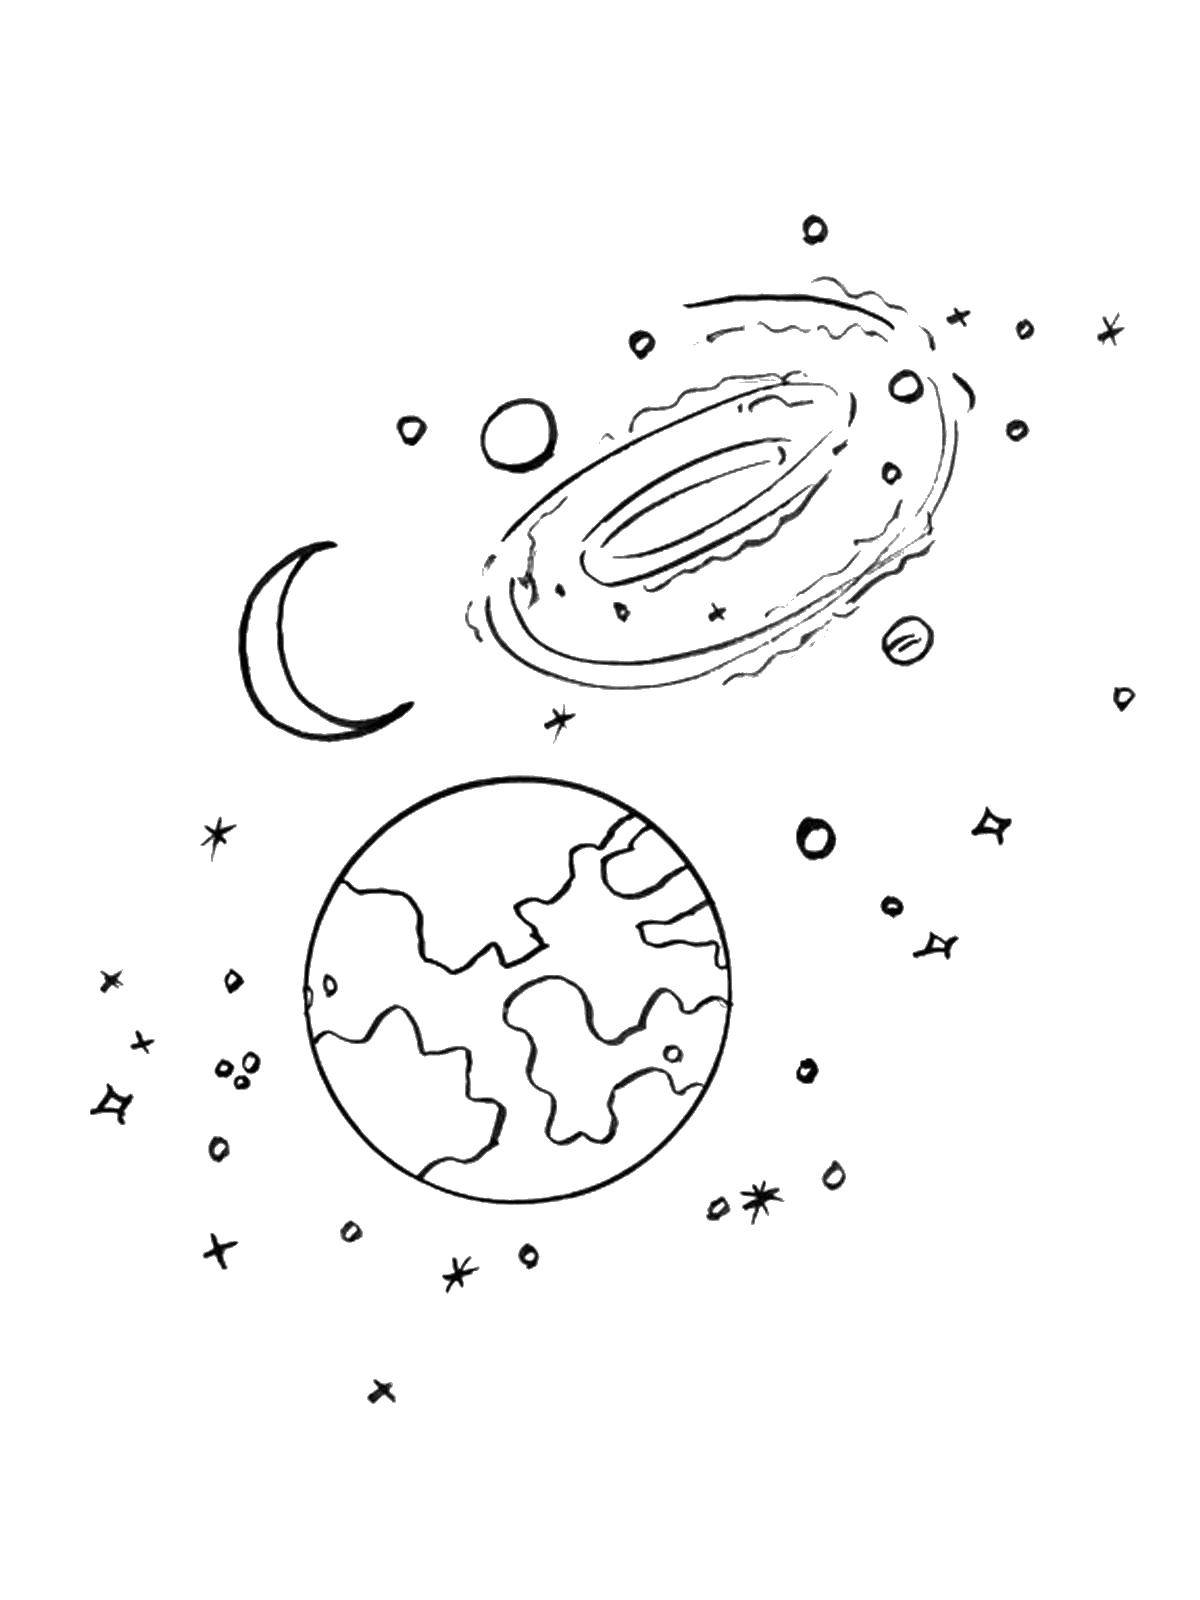 Coloring Our planet earth and moon in over the universe, do. Category space. Tags:  Have kosmak, planet, universe, Galaxy, Crescent, Moon, stars.